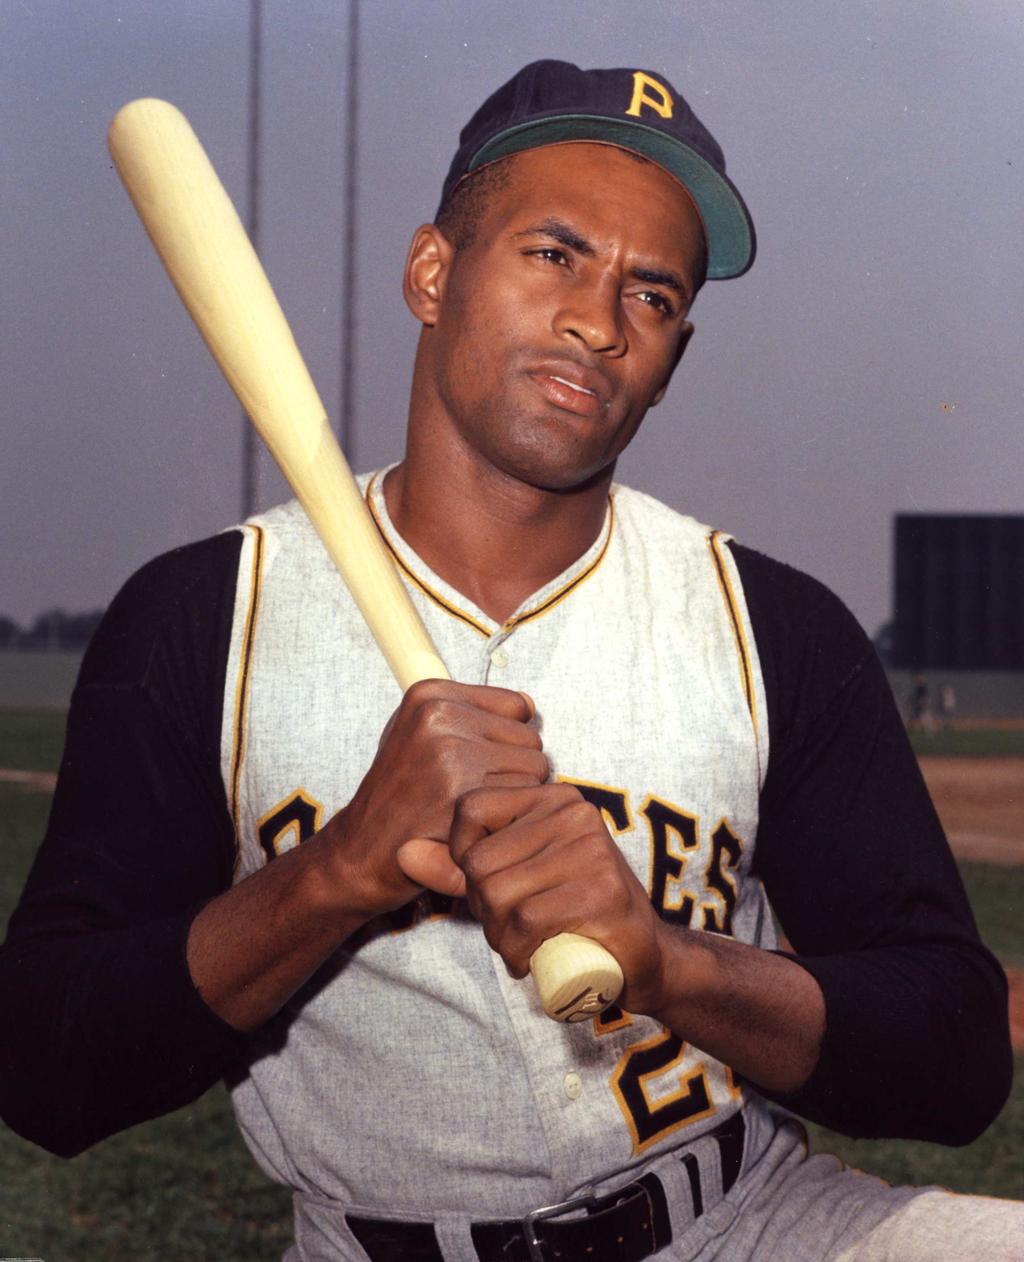 Roberto Clemente A majestic major league outfielder who earned election to the National Baseball Hall of Fame and worldwide acclaim for his humanitarian nature, Roberto Clemente overcame several